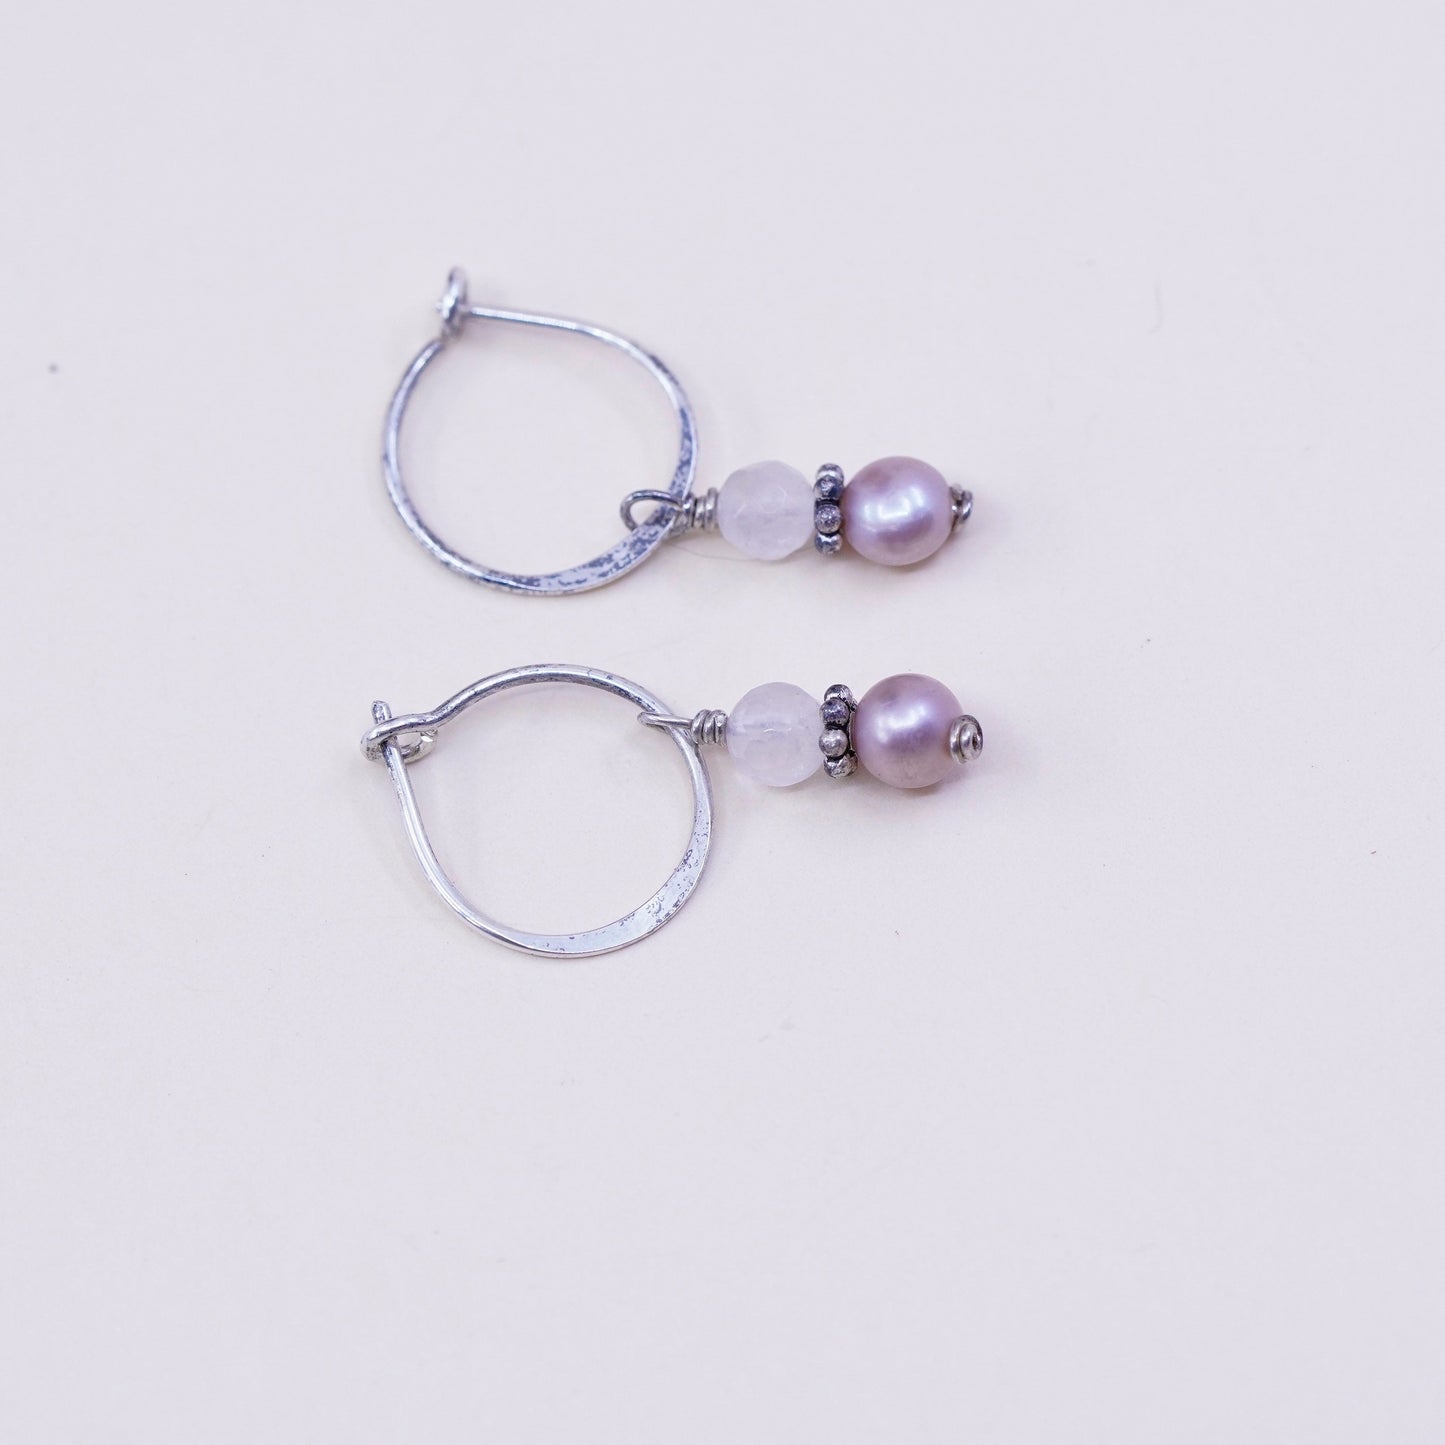 0.5”, Vintage sterling 925 silver earrings, minimalist primitive hoops with pink pearl and crystal, silver tested